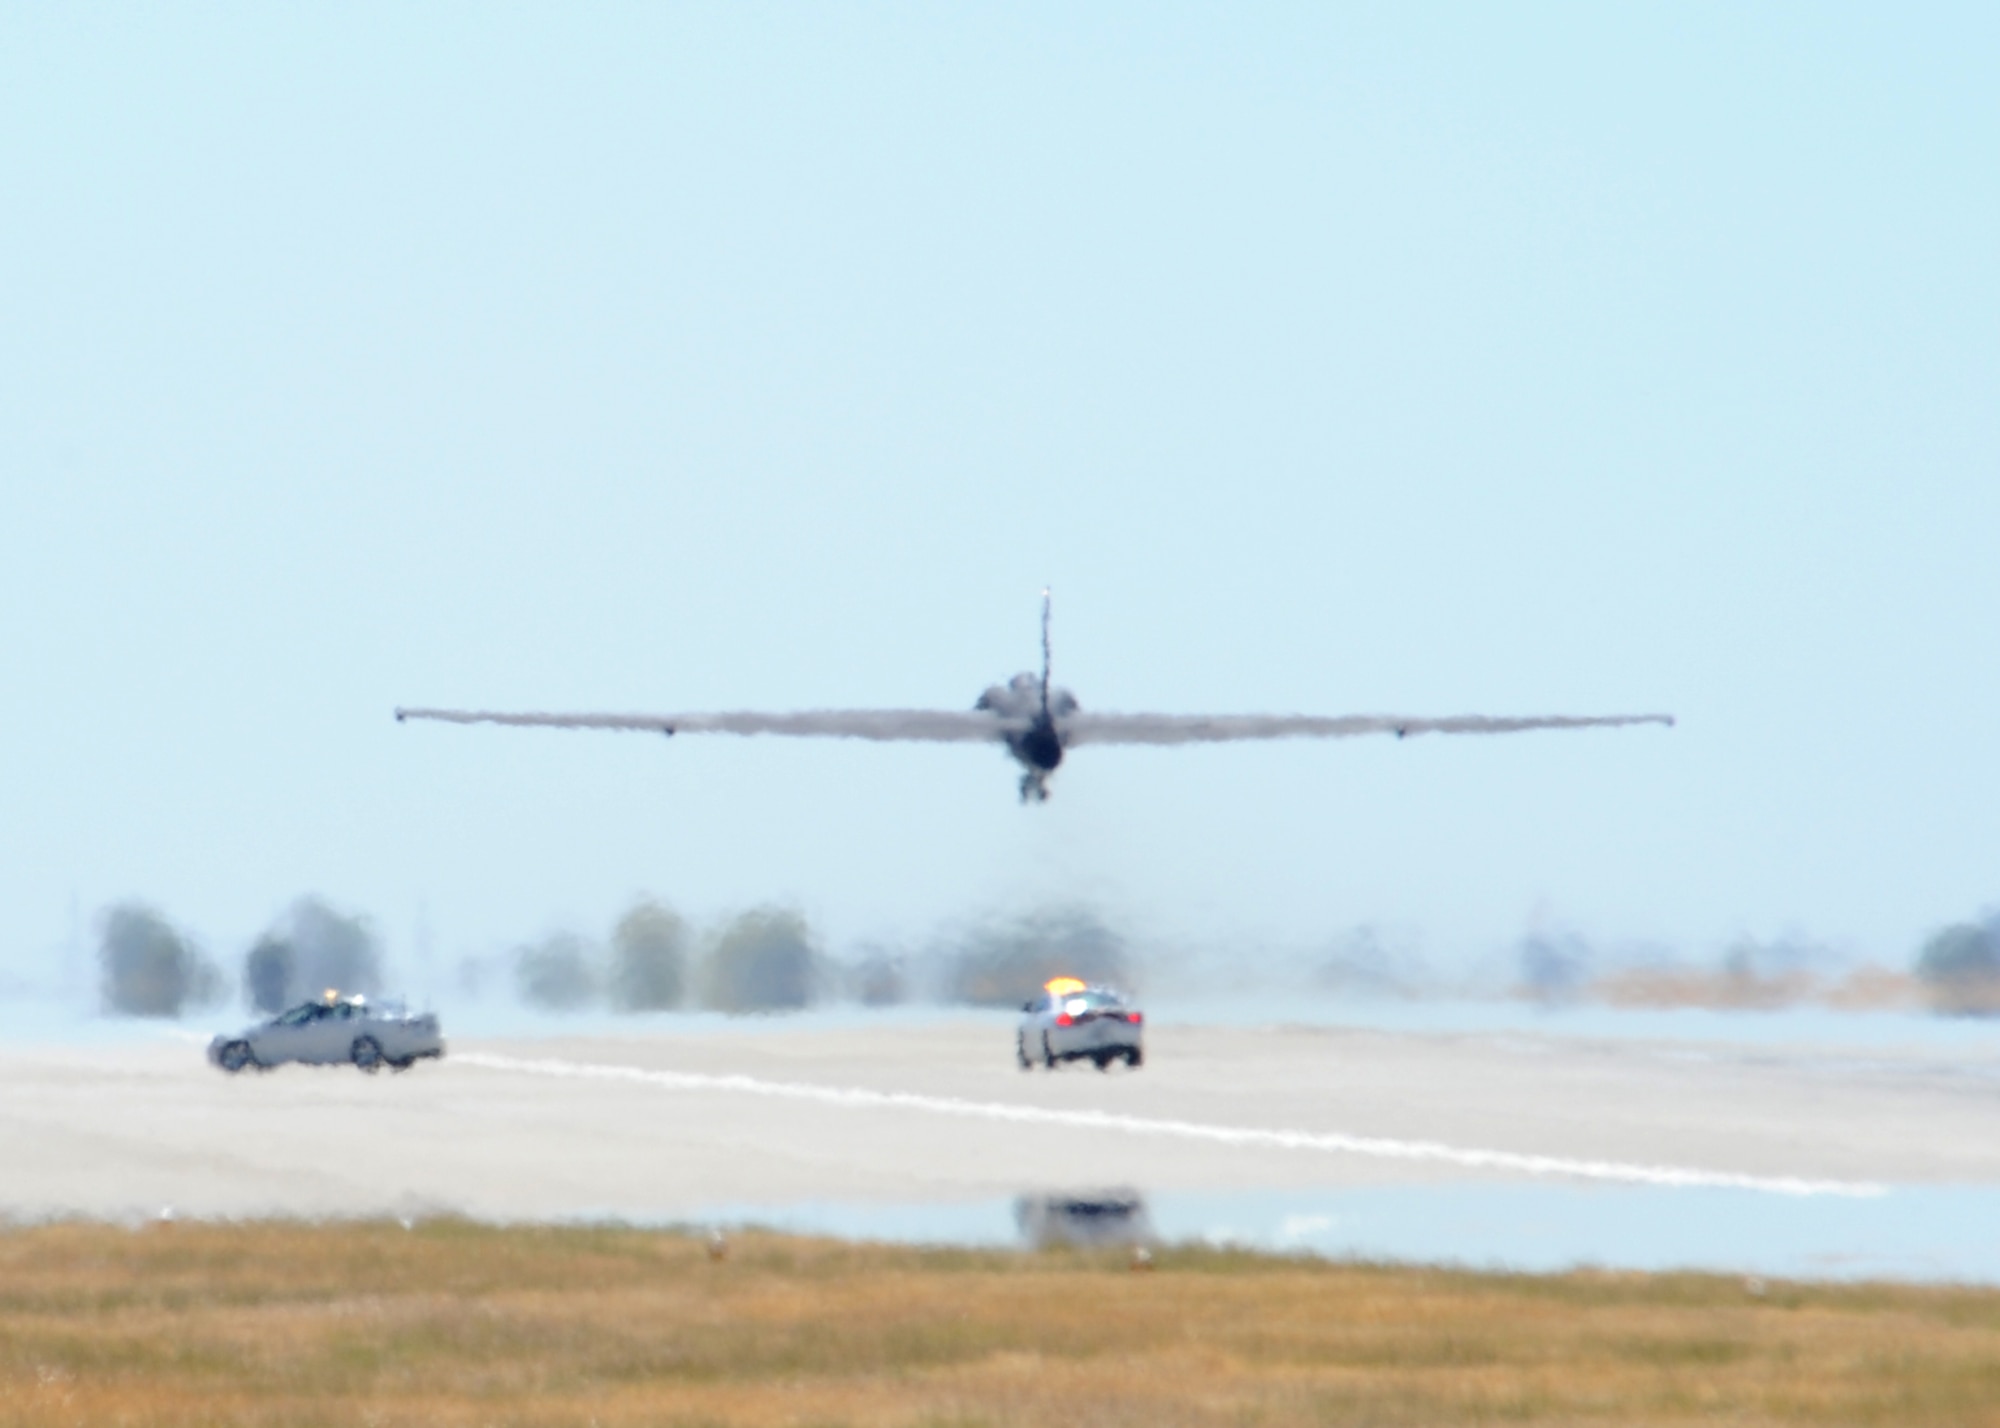 A U-2 Dragon Lady piloted by Maj. J.J., 1st Reconnaissance Squadron U-2 student pilot, takes off Aug. 31, 2016, at Beale Air Force Base, California. J.J.'s flight qualified him as the 1,000 pilot to operate the U-2 in the aircrafts 61 years of service. (U.S. Air Force photo by Senior Airman Ramon A. Adelan)